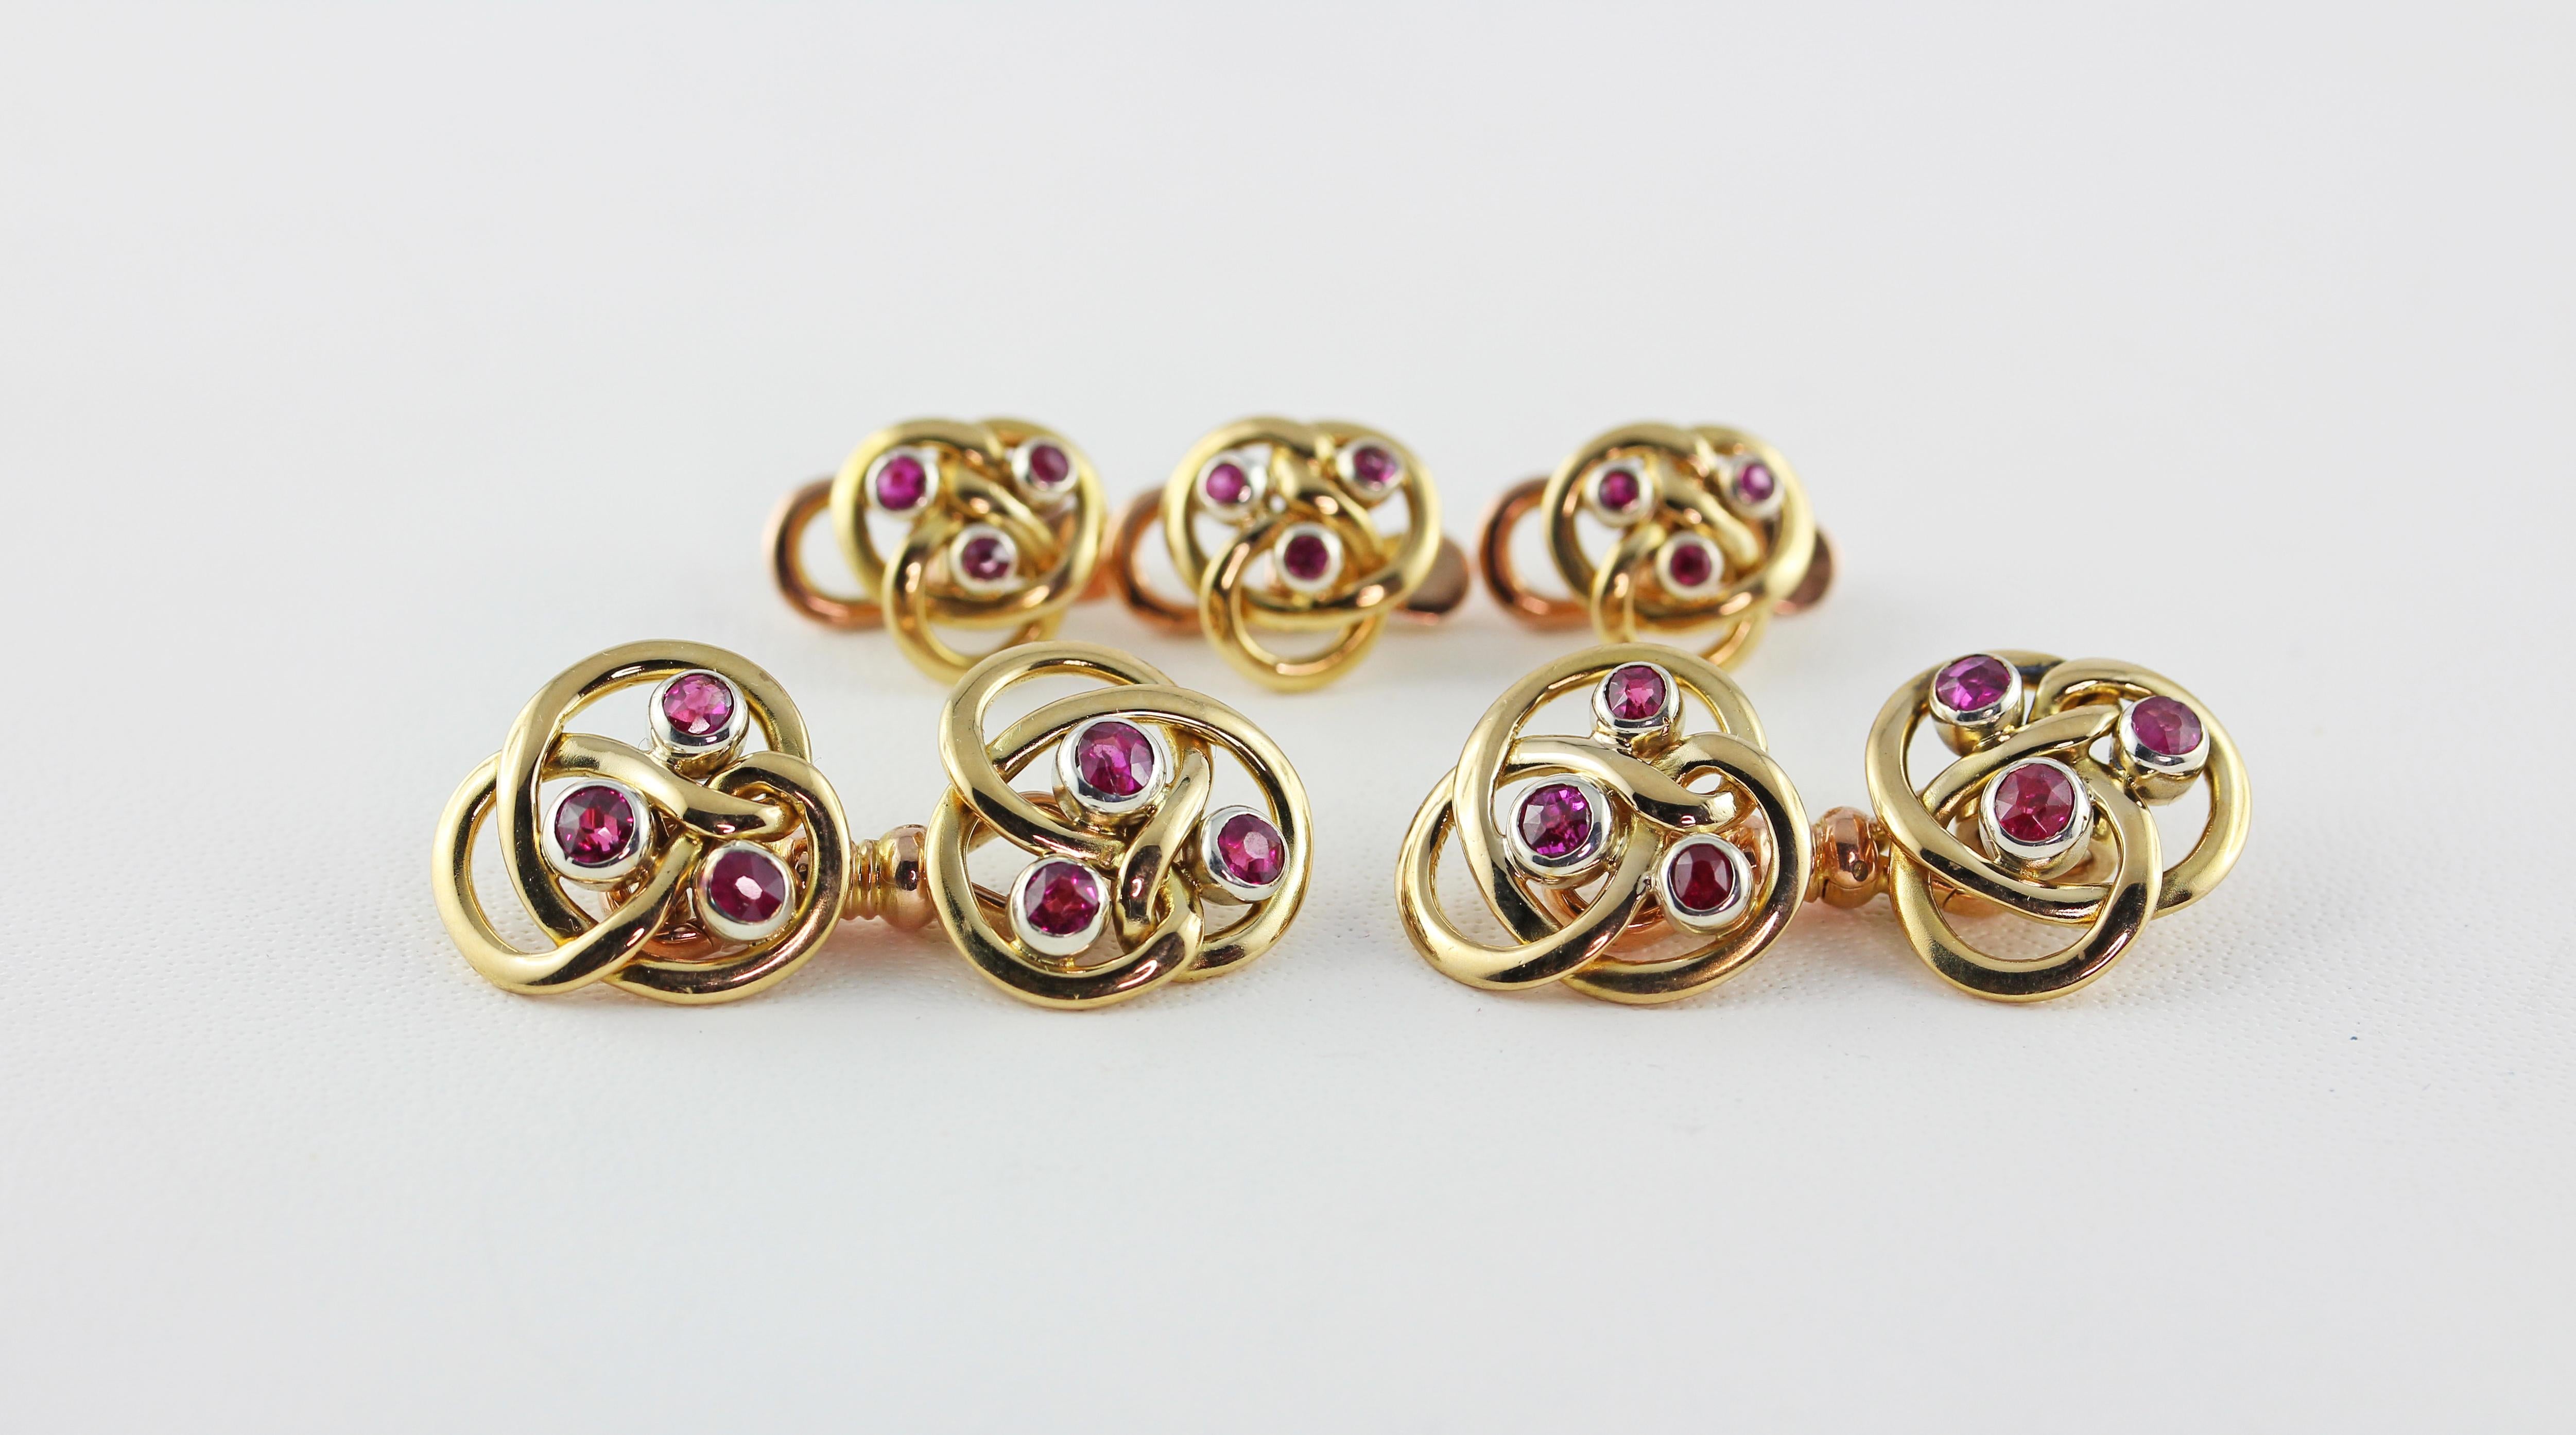 Set Tuxedo Cufflinks and buttons made in 18 Karat Yellow gold, each element is adorned by three rubies at the center and mounted in 18 karat white gold. 
The three buttons have been created as the cufflinks but smaller.
The closer of the buttons is